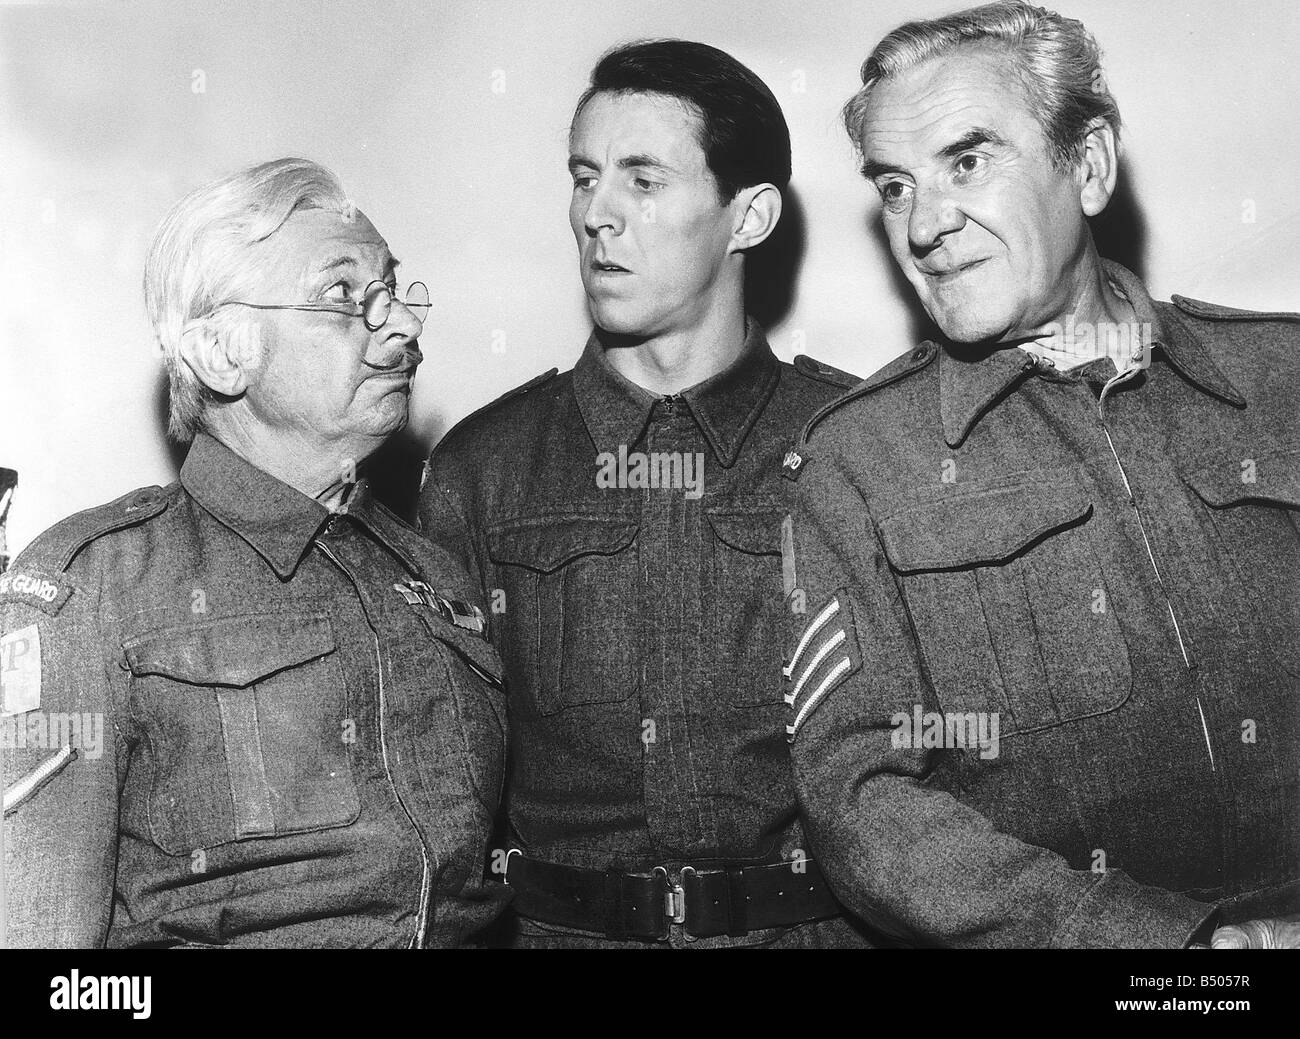 The cast of Dad Army Clive Dunn Graham Hamilton and John Le Mesurier during rehearsals for the BBC comedy Dads Army Stock Photo